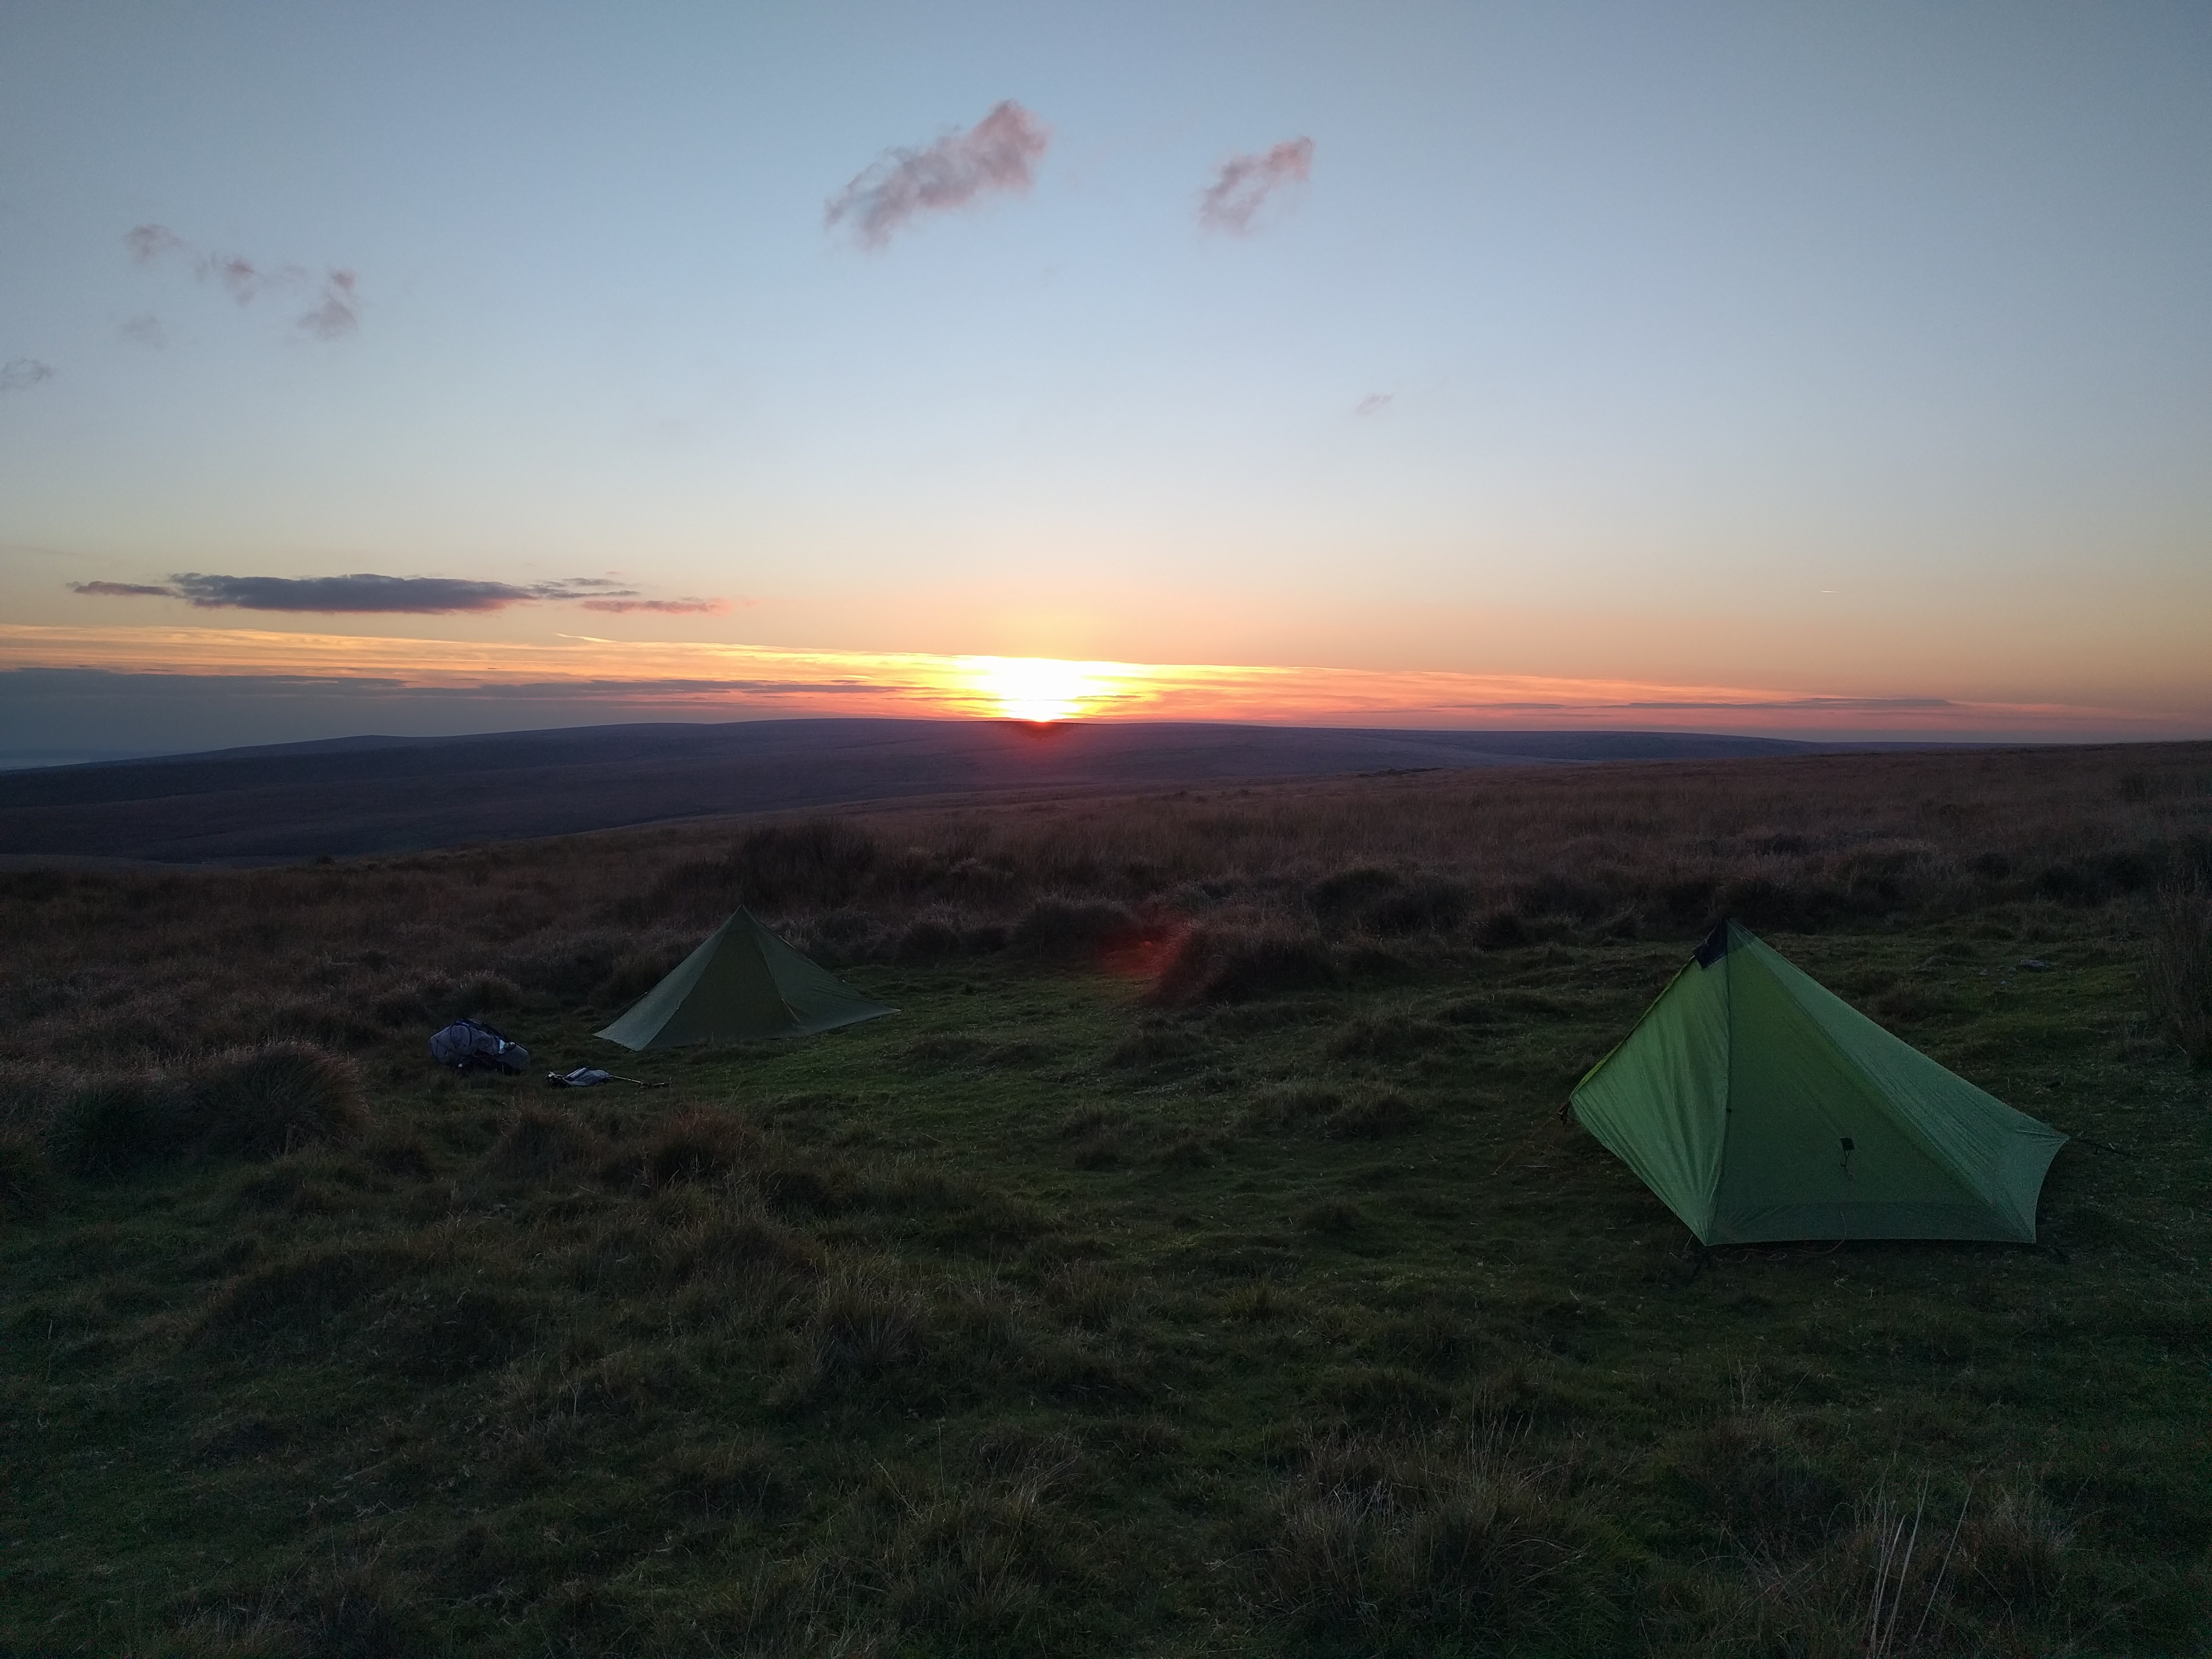 Camp on Quickbeam Hill #sh #twomoorsway